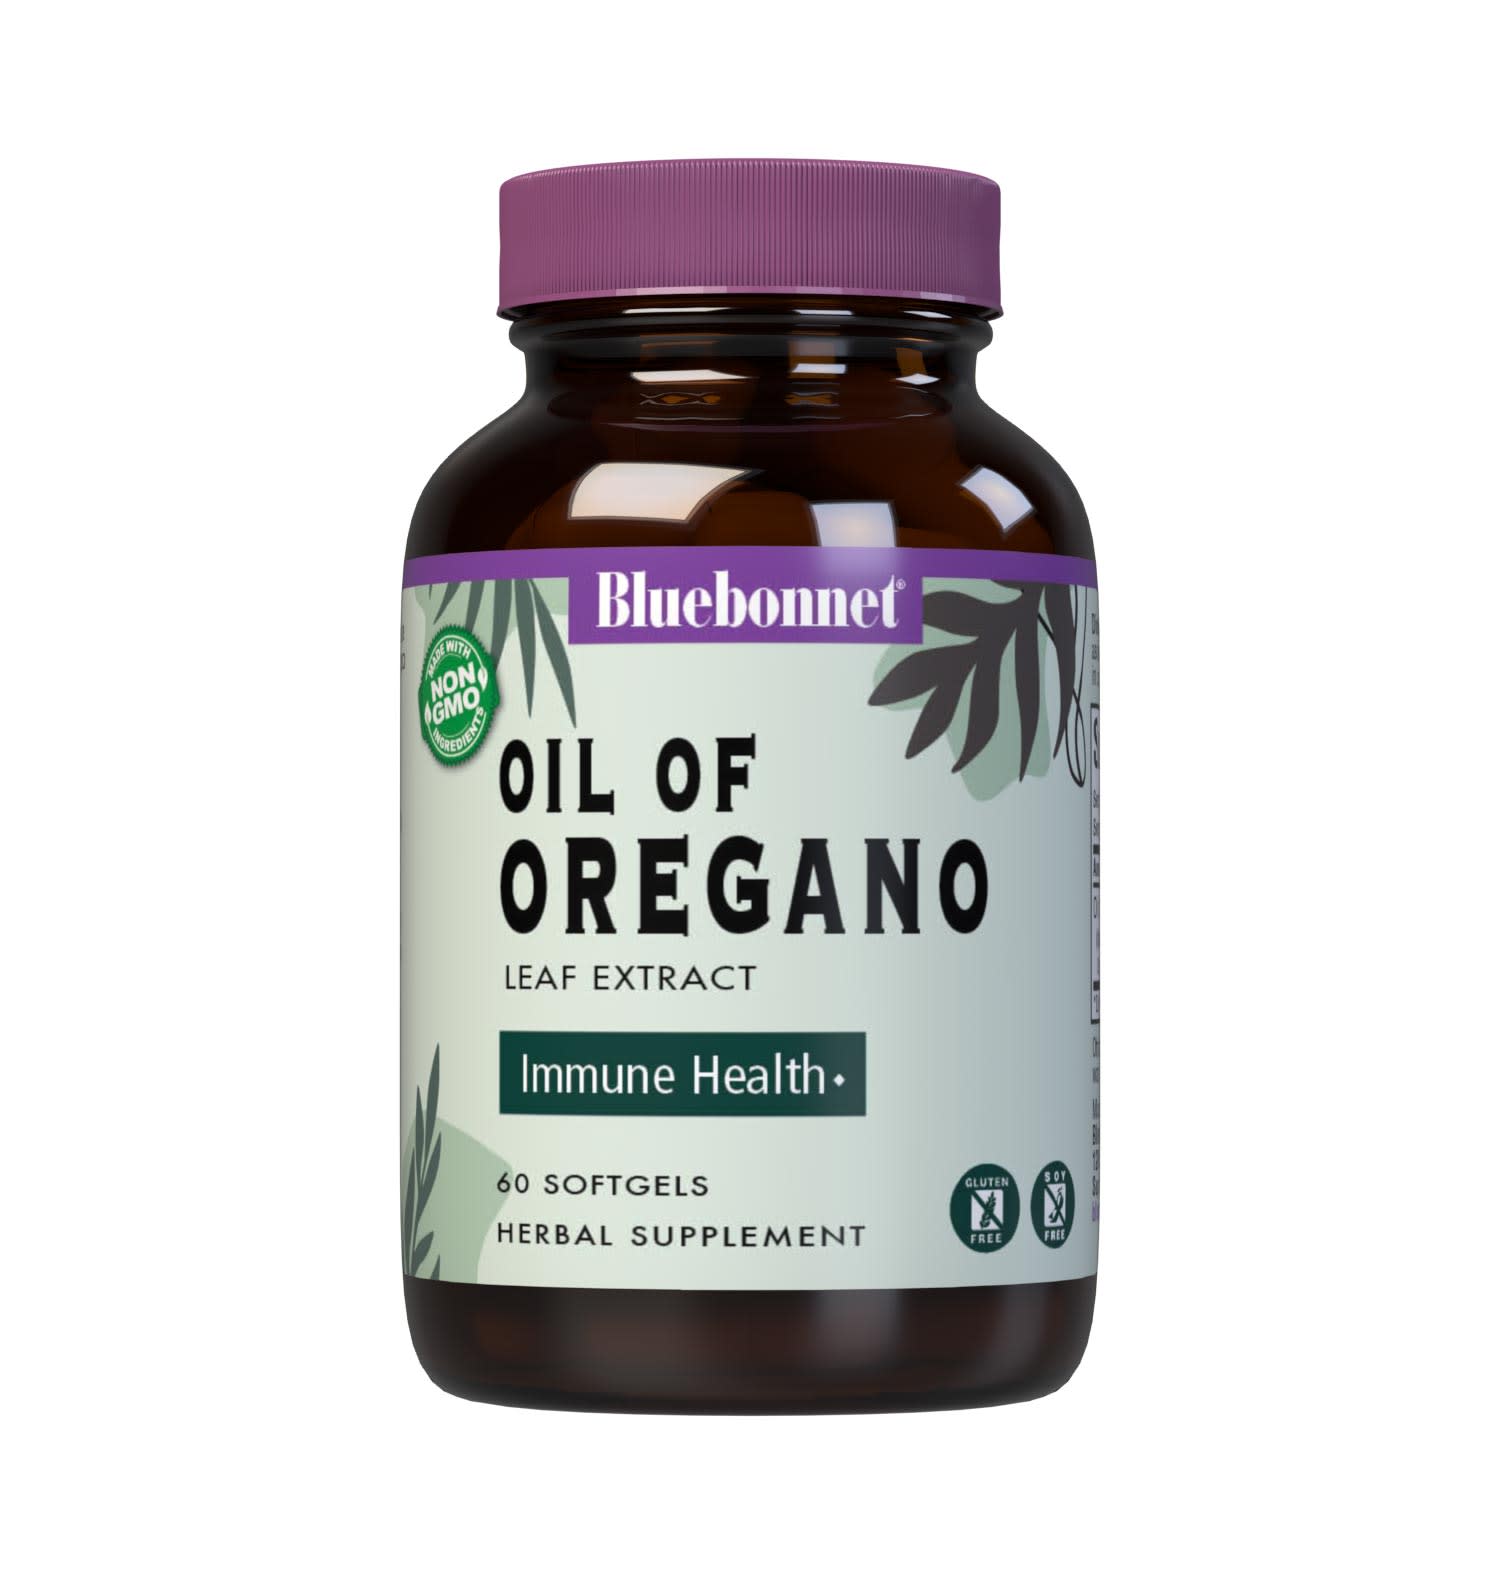 Bluebonnet’s Oil of Oregano Leaf Extract 60 Softgels provide a concentrated and highly-refined full spectrum extract of oregano leaf, which may support immune health, that is produced from a true Wild Mediterranean species and is harvested from the mountainous regions of Hungary. A clean and gentle water-based extraction method is employed to capture and preserve oil of oregano’s most valuable components. #size_60 count